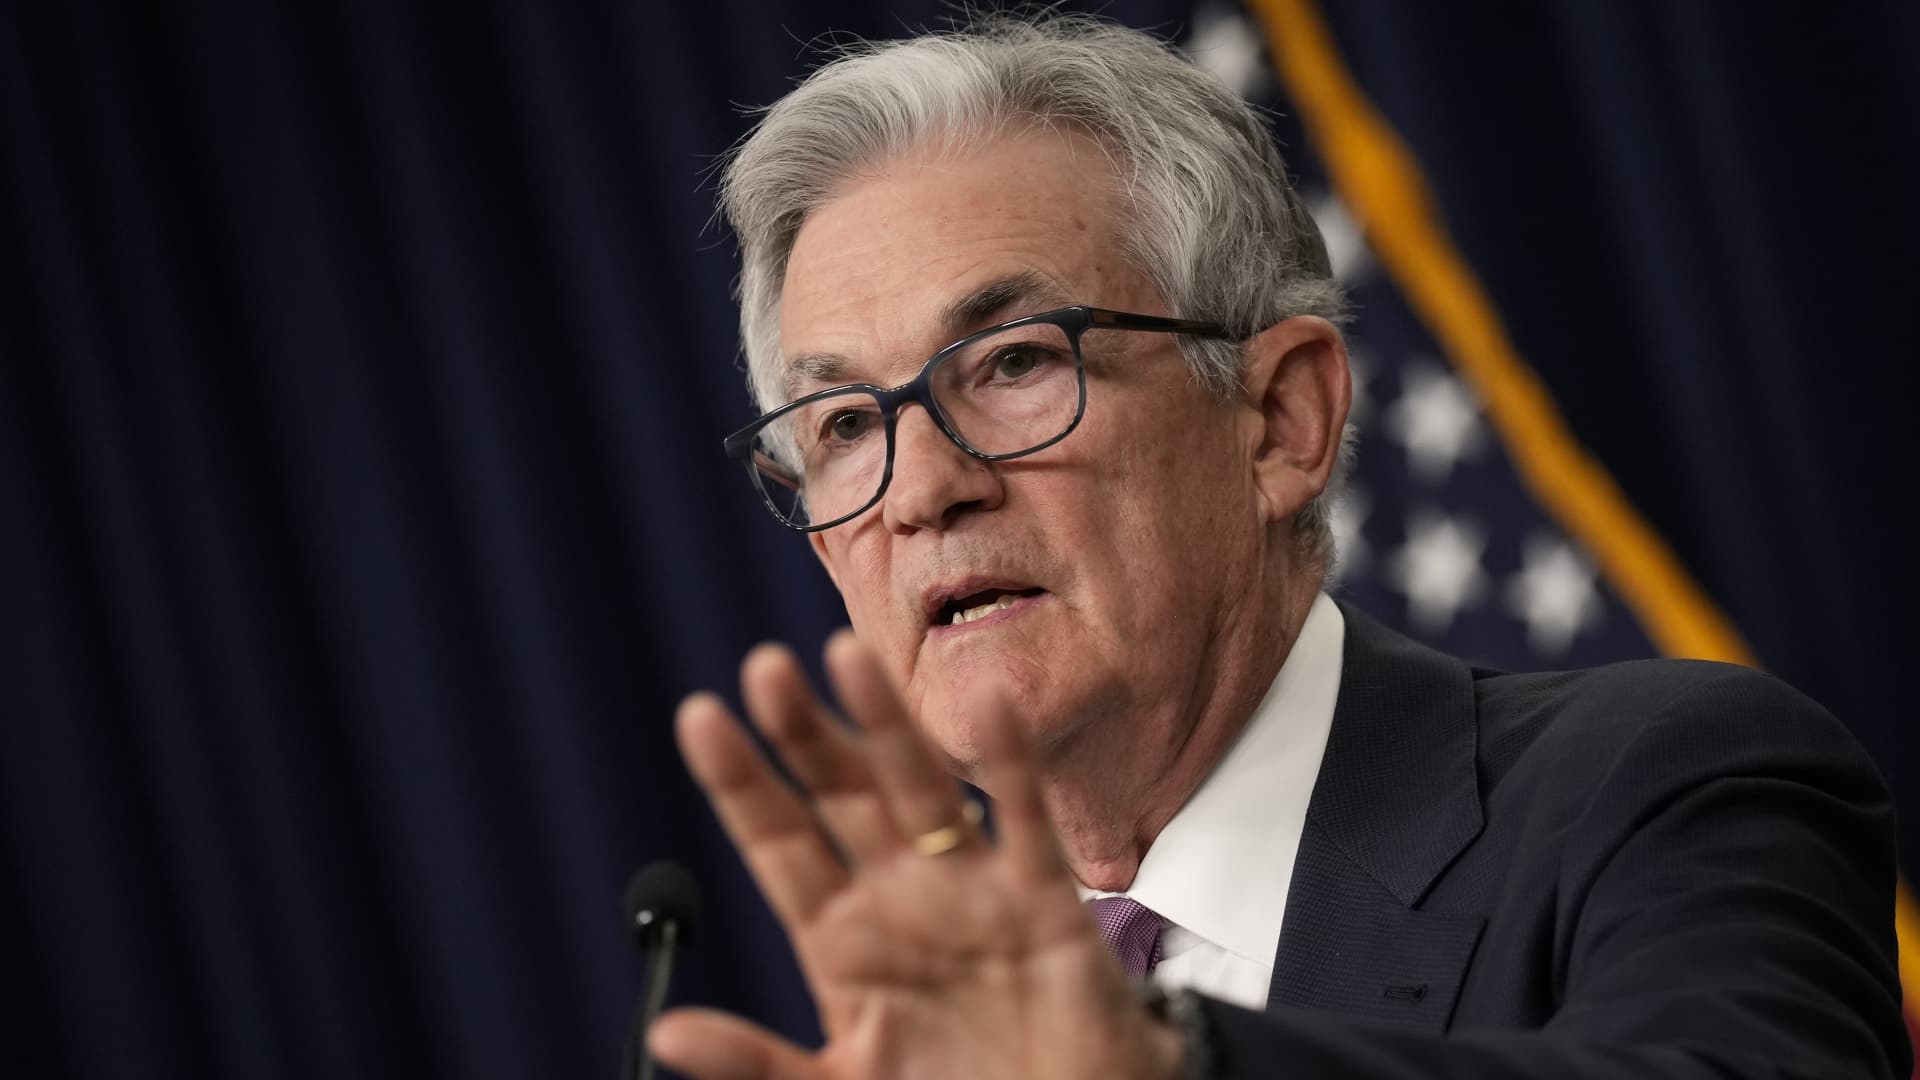 The market isn't buying the Fed's tough talk on interest rates